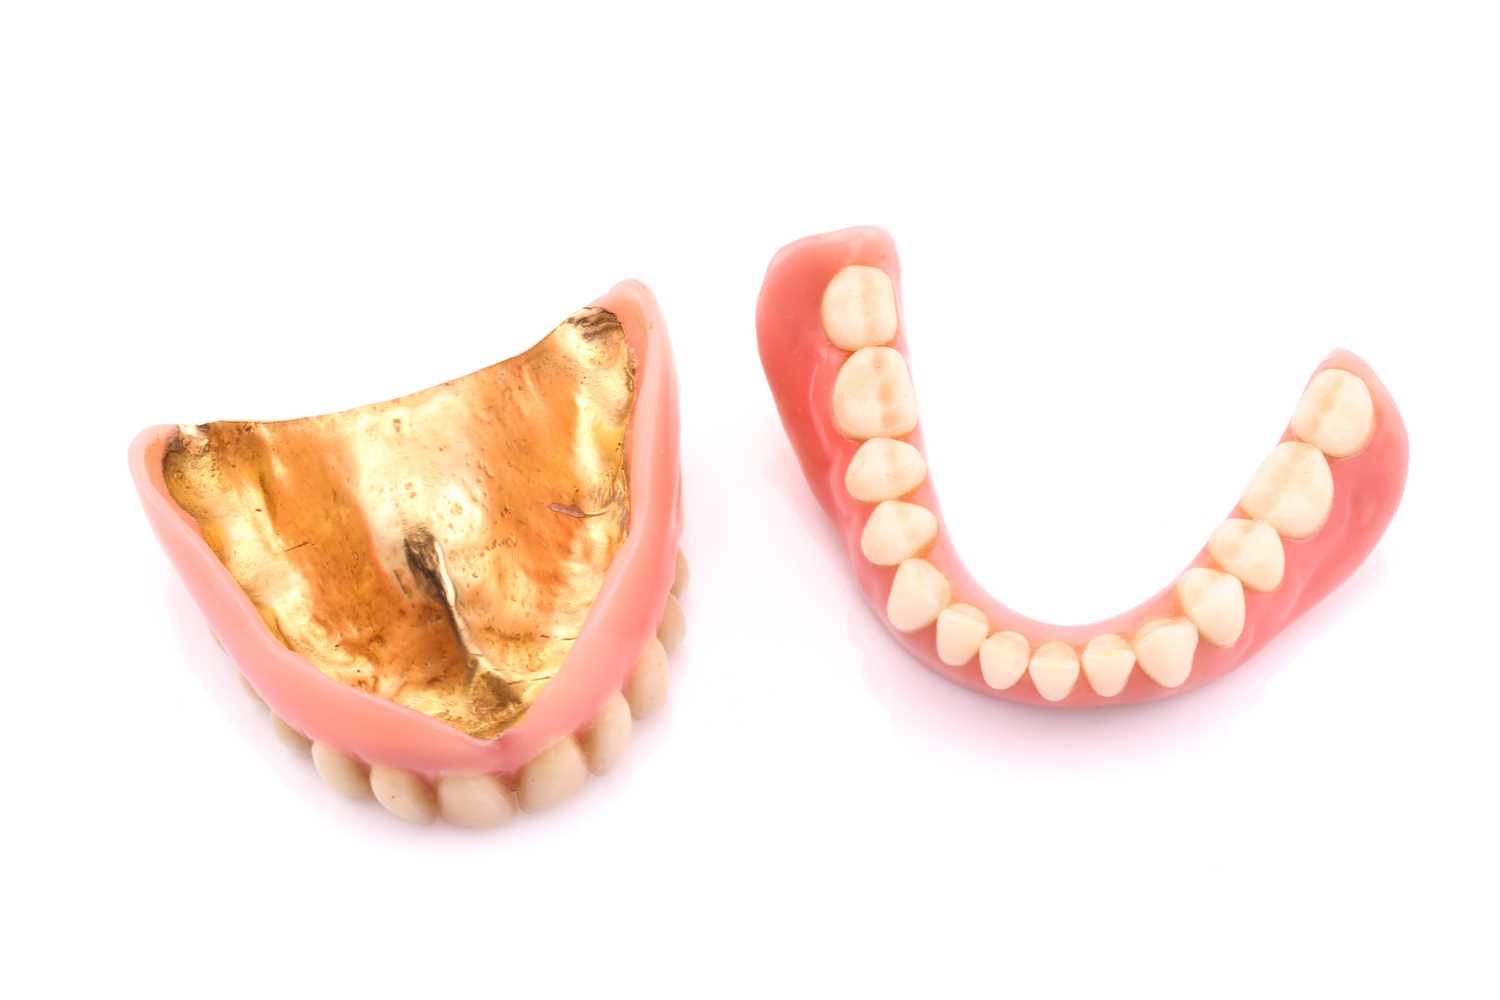 Pair of false teeth with gold content, 53.8 grams all inCondition report: Tested as 18k gold plus - Image 4 of 5